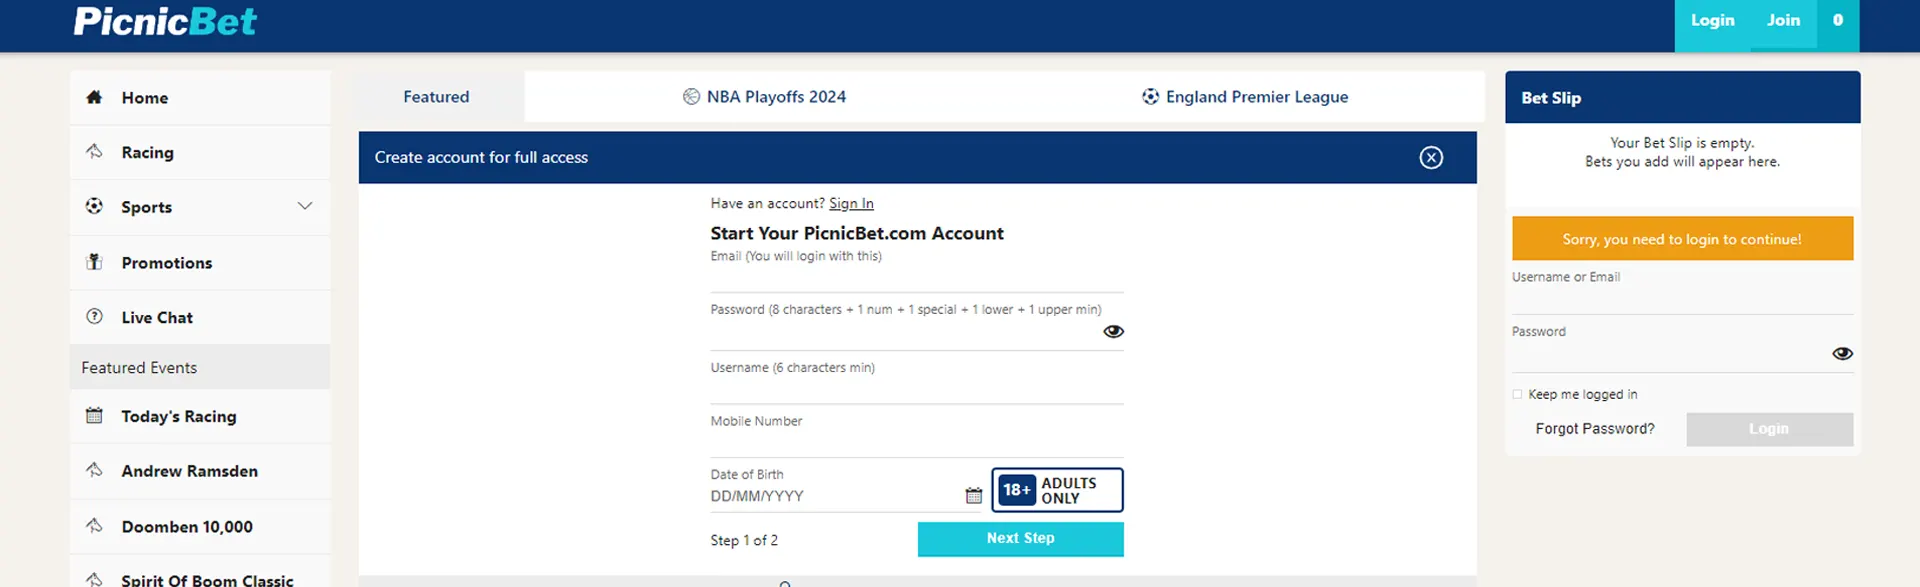 Page for PicnicBet sign up, showing account creation form.